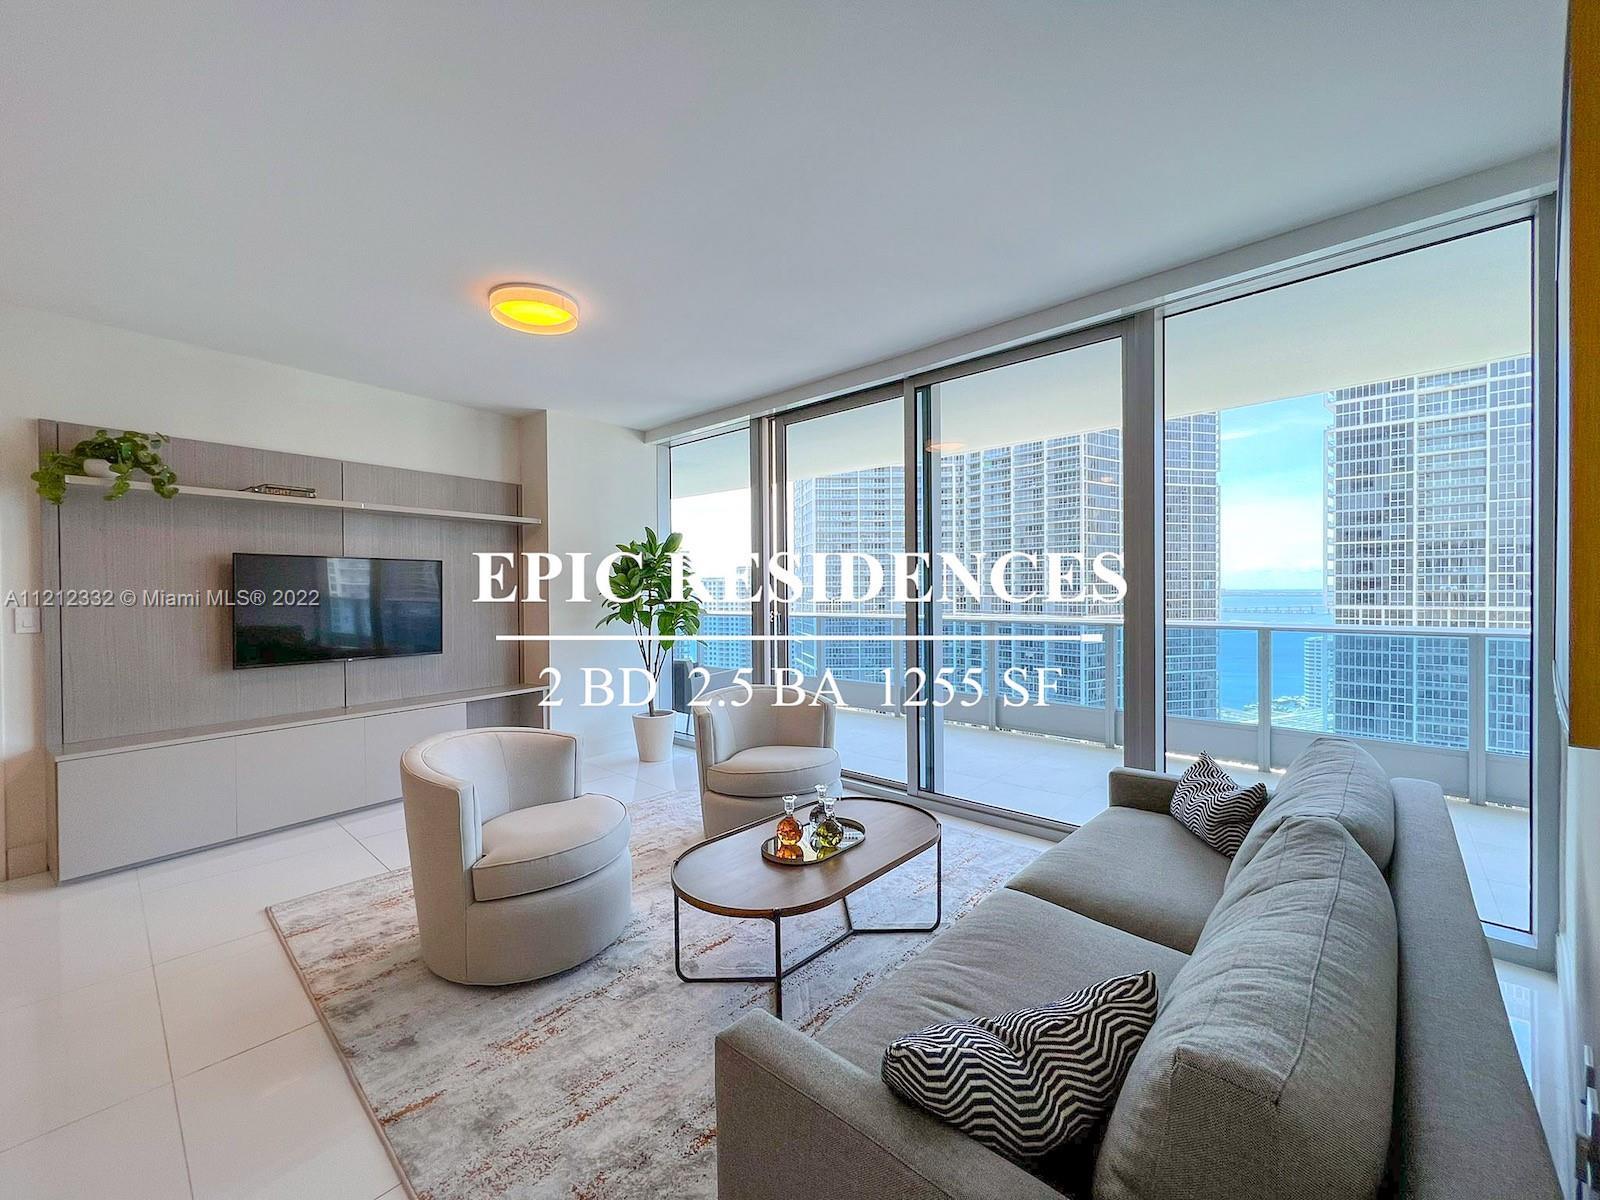 Welcome to Epic Residences #3104. Enjoy great views to the Miami river and biscayne bay from the 31s